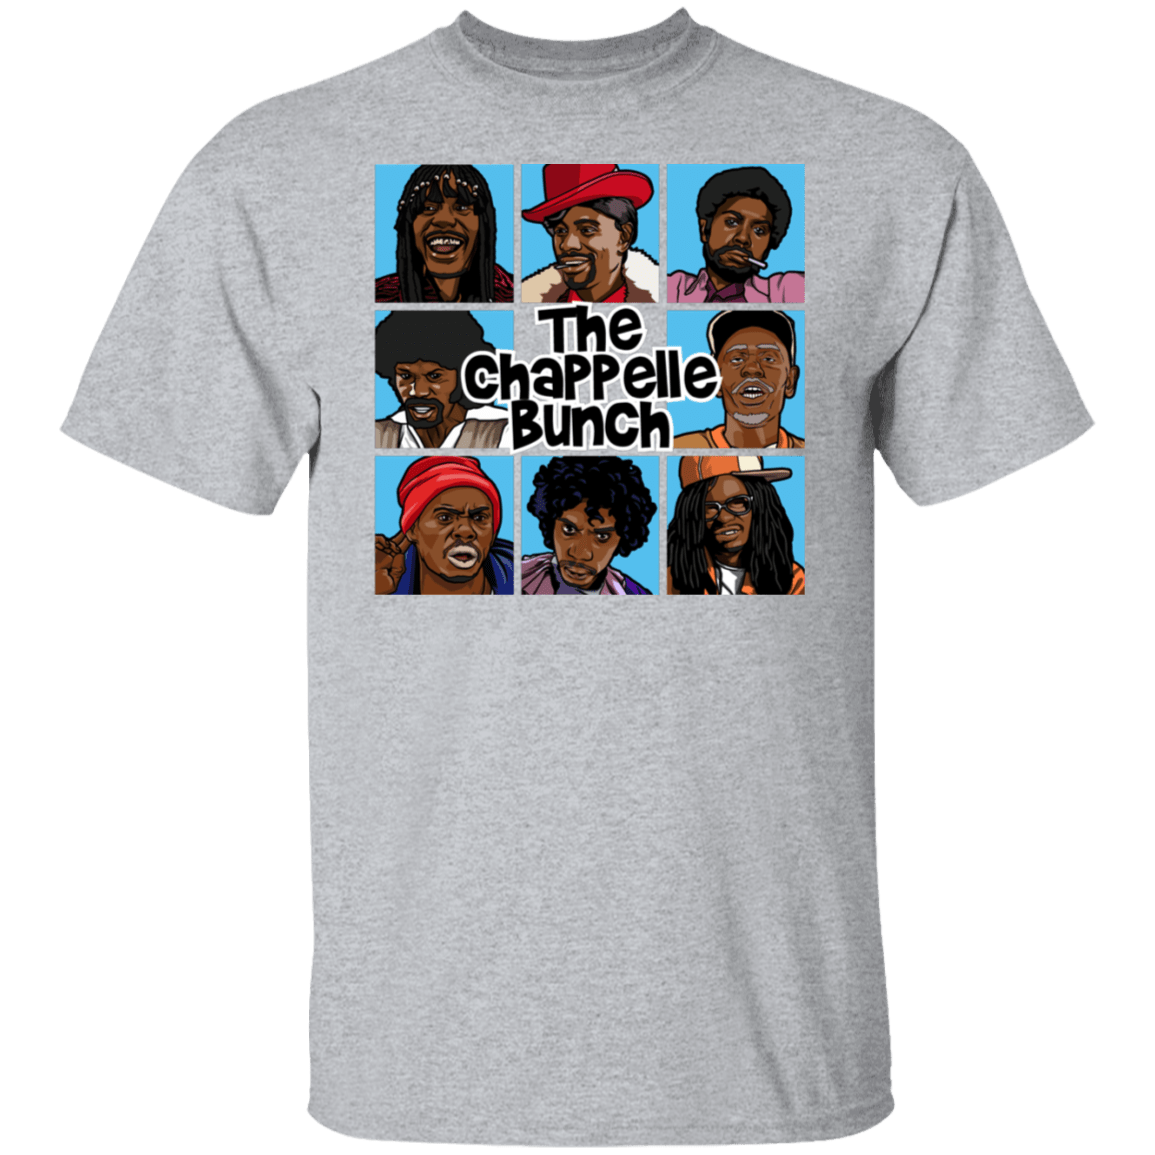 T-Shirts Sport Grey / S The Chappelle Bunch T-Shirt